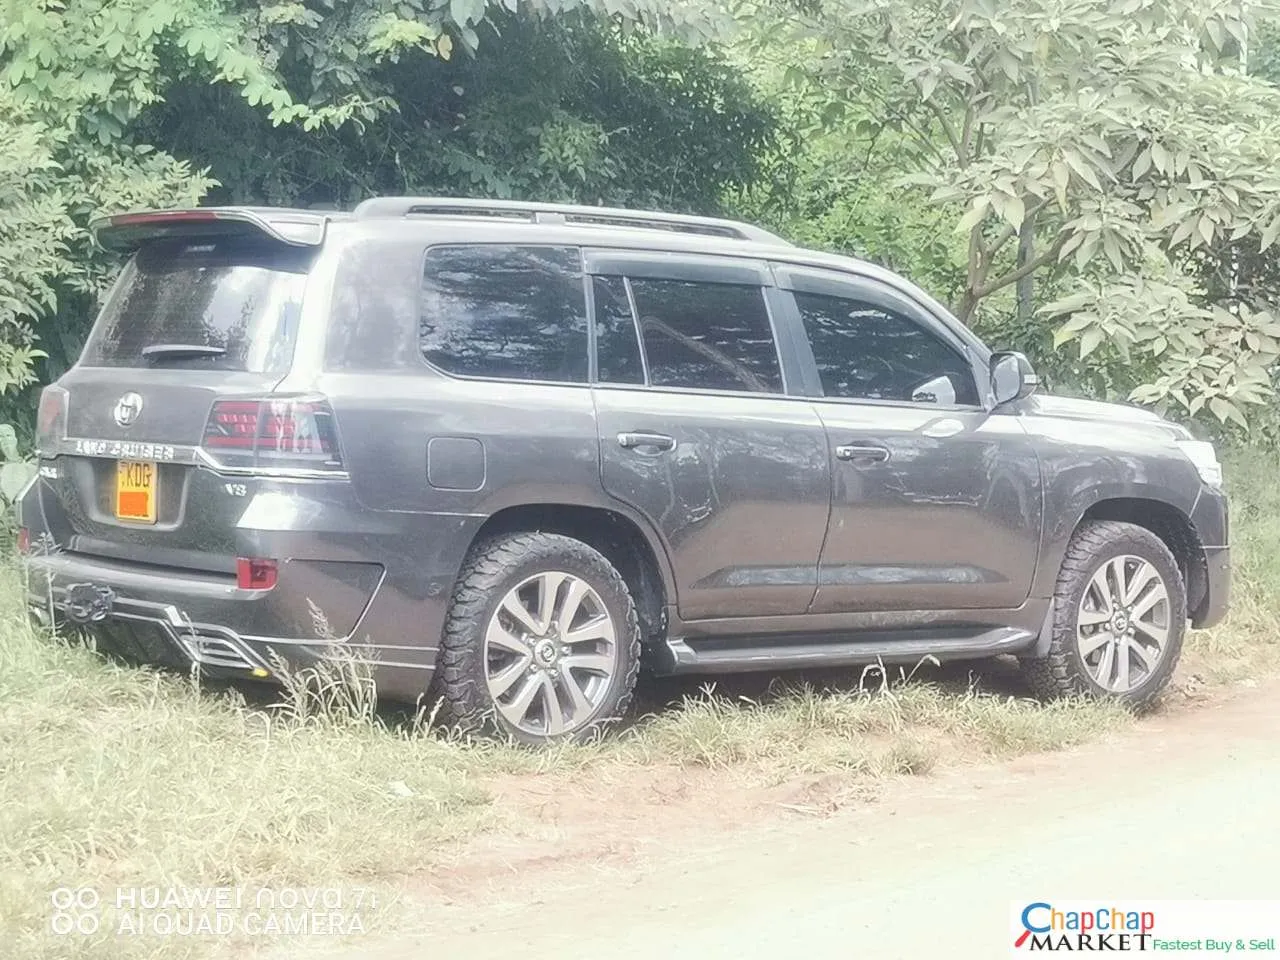 Toyota Land cruiser V8 DIESEL Manual for sale in Kenya QUICK SALE TRADE IN OK EXCLUSIVE Hire purchase installments